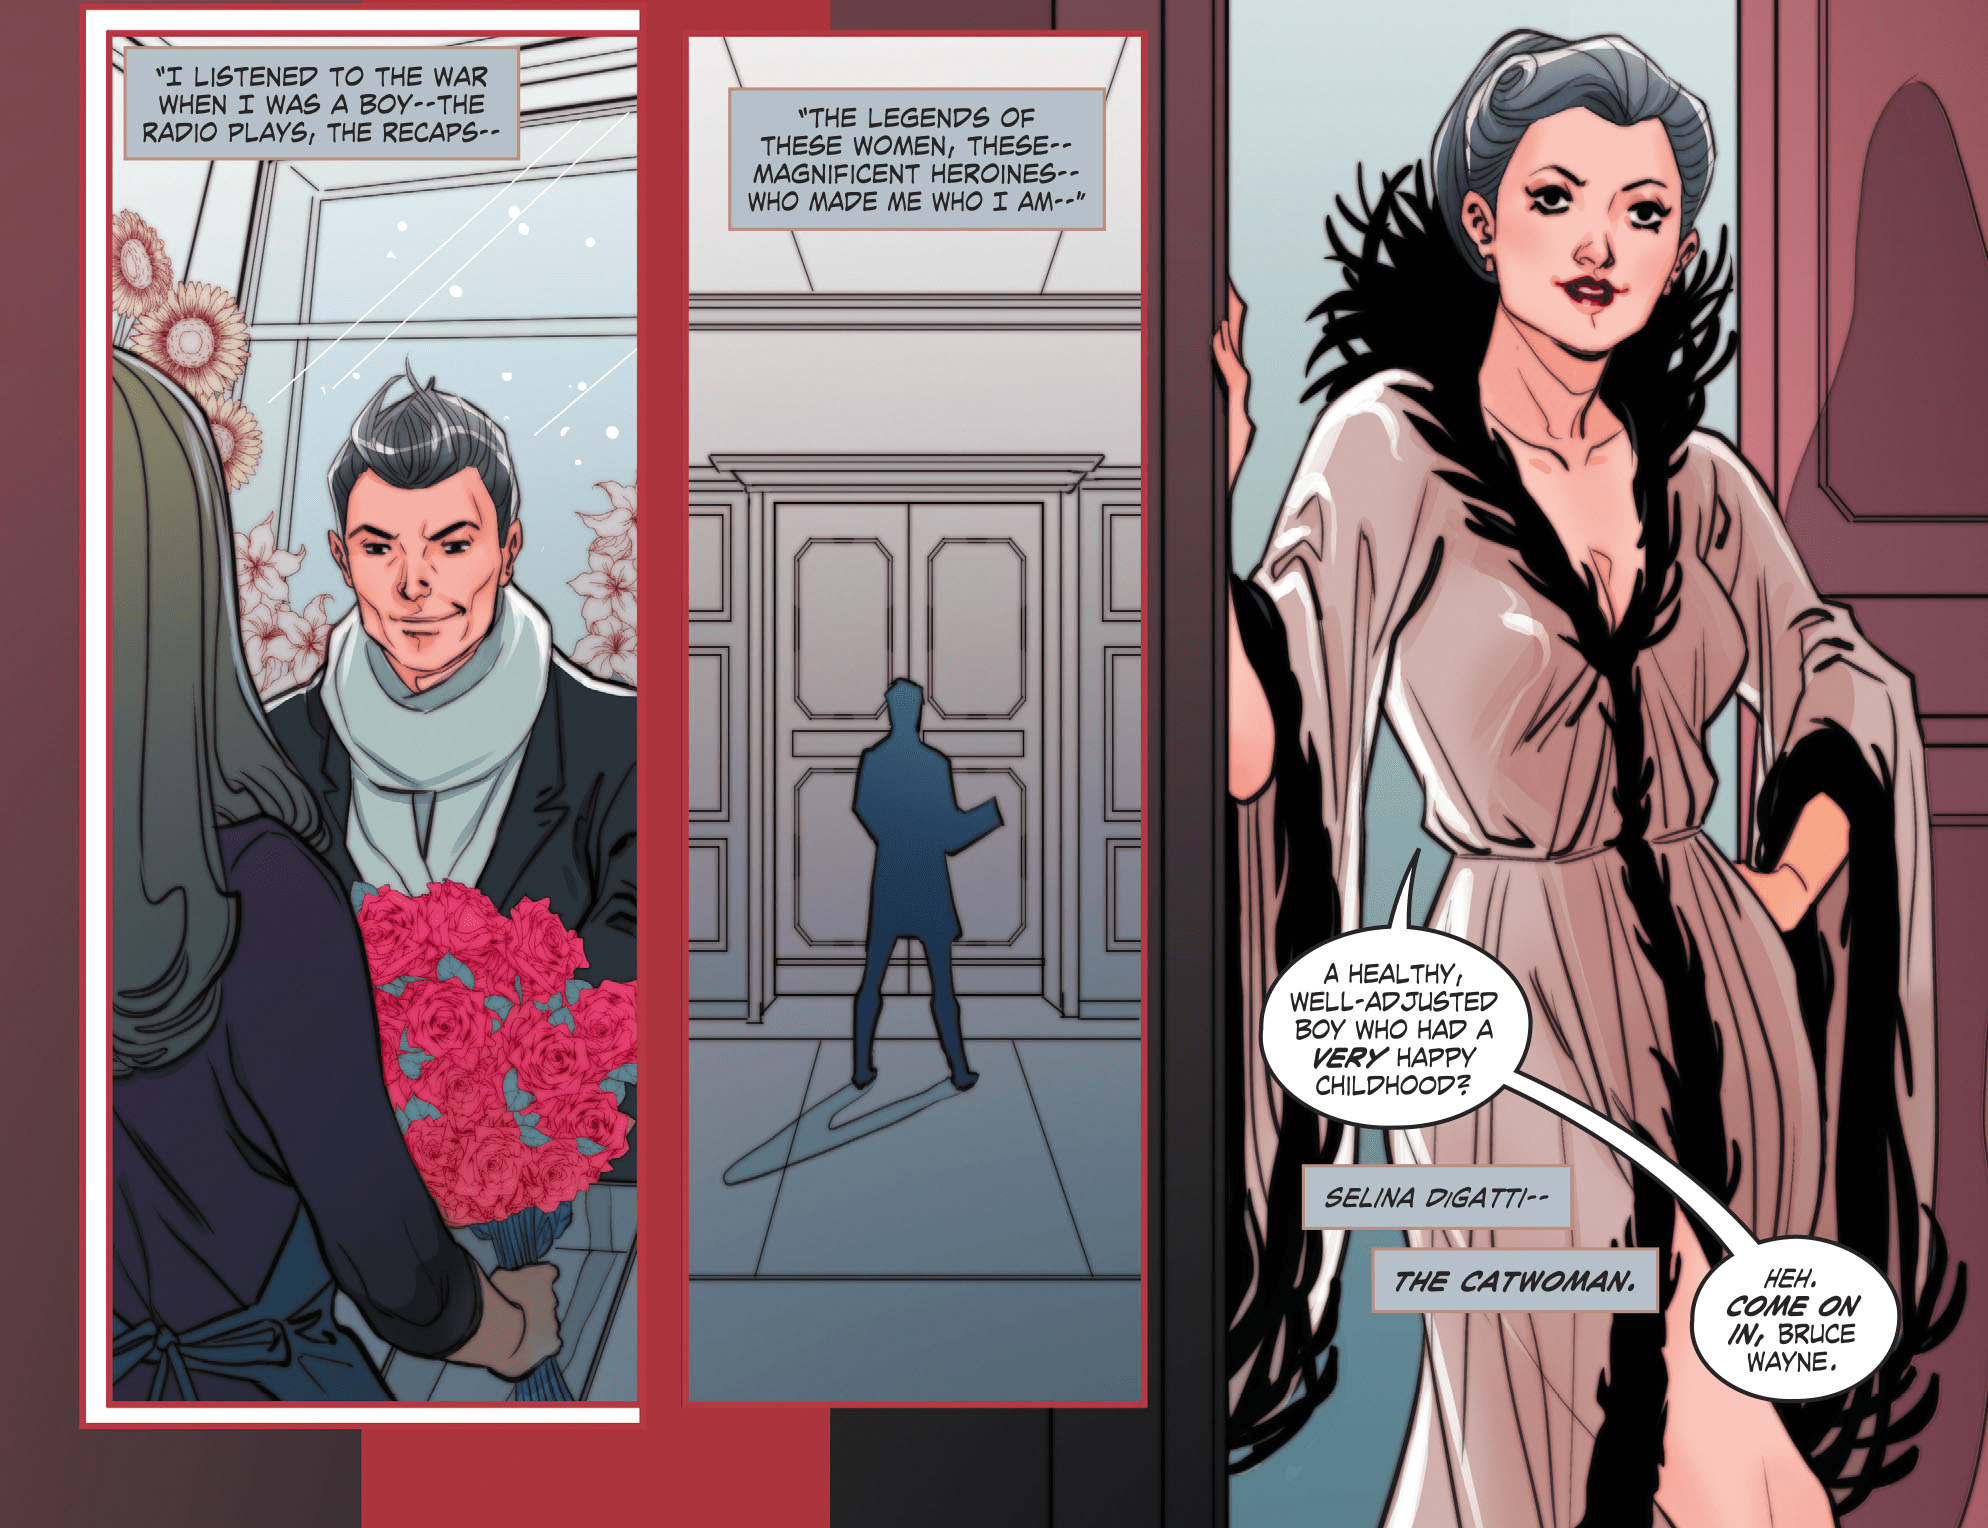 Get A Look Inside The Wonderful Bombshells: United’s Final Chapter 